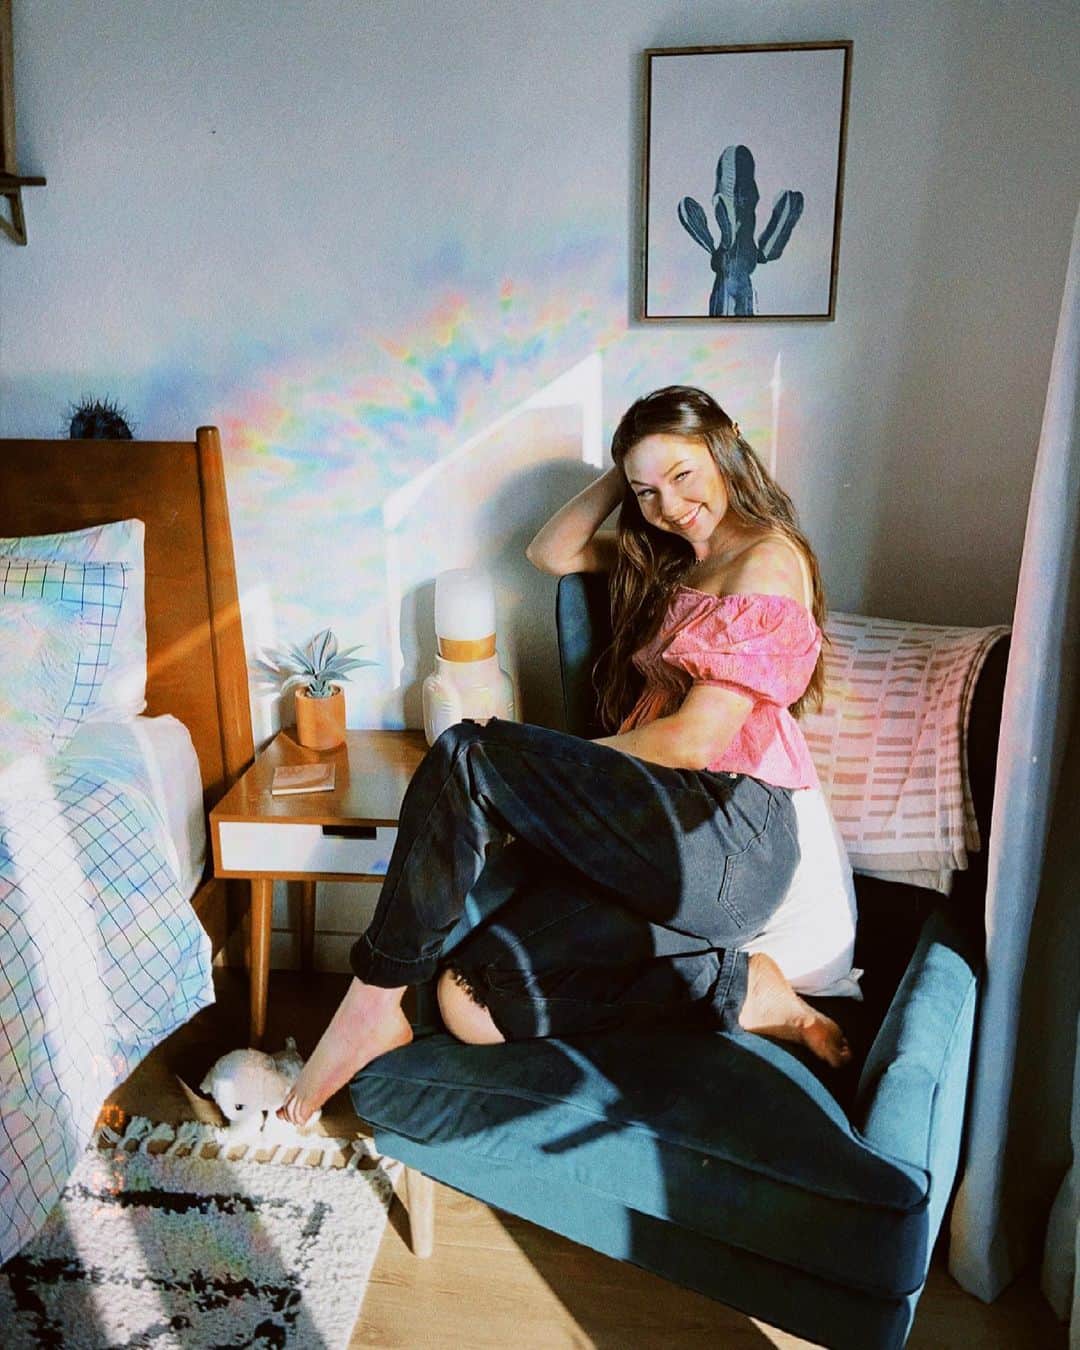 Meredith Fosterのインスタグラム：「Jesus is straight up my best friend, counselor, and healer. When something happens I dial 1-800 HEAVEN ☎️   Yesterday I spent a long time in therapy with the Lord telling Him my concerns, frustrations, and then finally thanking Him for listening to me because this girl likes to talk lol. I laid it all out in front of Him and said here take it anything that doesn’t belong in my heart, mind, or body burn it away! Almost immediately I felt this giant weight lifting off me as he replaced the spirit of heaviness for dancing / praise 🎉  This is what the Lord spoke to me and I felt someone needed to hear it today 💗  I’ve got you daughter and sons. Keep holding onto me. I’ve got your life in the palm of my hands just when you think something is too hard remember child nothing is impossible with me. It’s ok to be disappointed but don’t stay there. Don’t harden your heart, but forgive them. There is a great reward for those who continue to love those who hurt you. I’m wiping away every tear and collecting them in my bottle. I am your strength just rest and rely on me. Your faith moves my heart the way you trust me brings me joy. Less striving more sitting with me. Let me into every wound, scar, & heartbreak. Let my unconditional love and grace overwhelm you. I want to heal you beloved. Right now, today. I want you free. “Here I am! I stand at the door and knock. If anyone hears my voice and opens the door, I will come in and eat with that person, and they with me.” Revelation 3:20  The Lord is dancing and singing over you right now, he is so pleased with you.  I am not a licensed professional, sharing based off my own testimony. @drcarolineleaf is a great resource for all things mental health 🙌🏼」